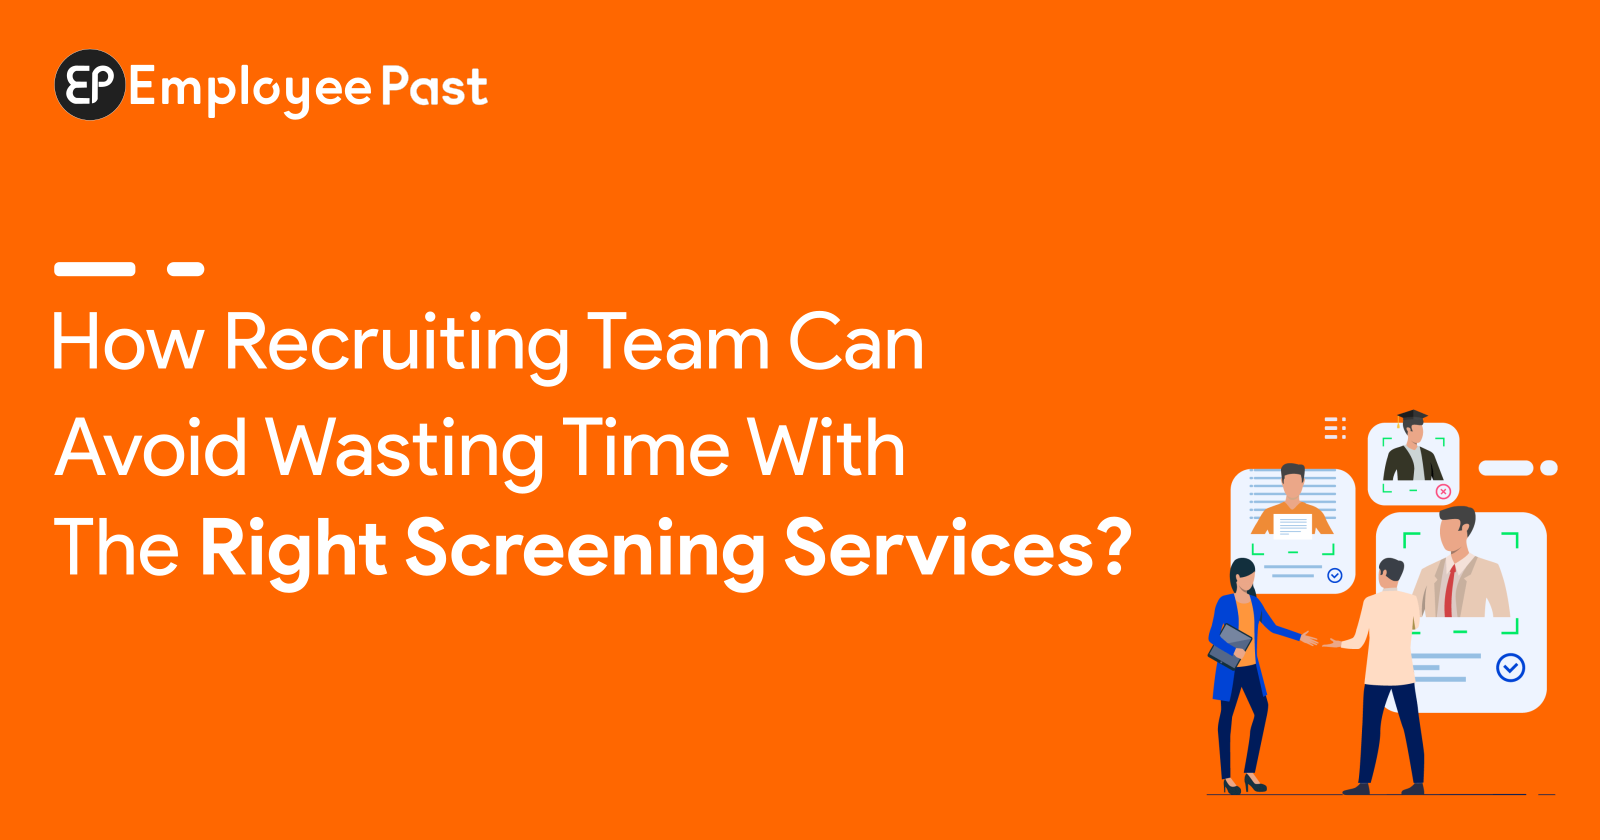 How Recruiting Team can Avoid Wasting Time with the Right Screening Services?